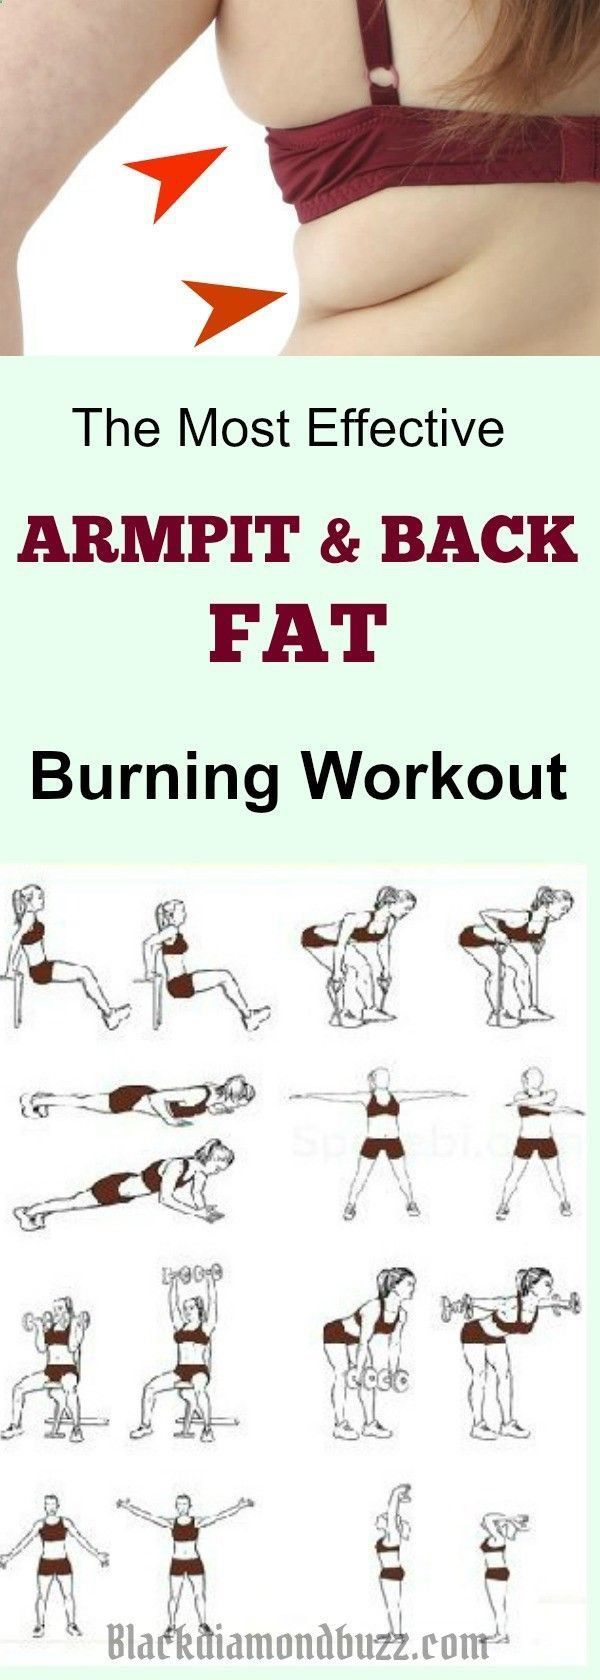 Diet Fast - 2 Week Diet - Best exercises for Back fat rolls and underarm fat at Home for Women : This is how you can get rid of back fat and armpit fat fast 1 week this summer . diet workout toned arms #HomeFitness A Foolproof, Science-Based System that's Guaranteed to Melt Away All Your Unwanted Stubborn Body Fat in Just 14 Days...No Matter How Hard You’ve Tried Before! -   19 body fat diet
 ideas